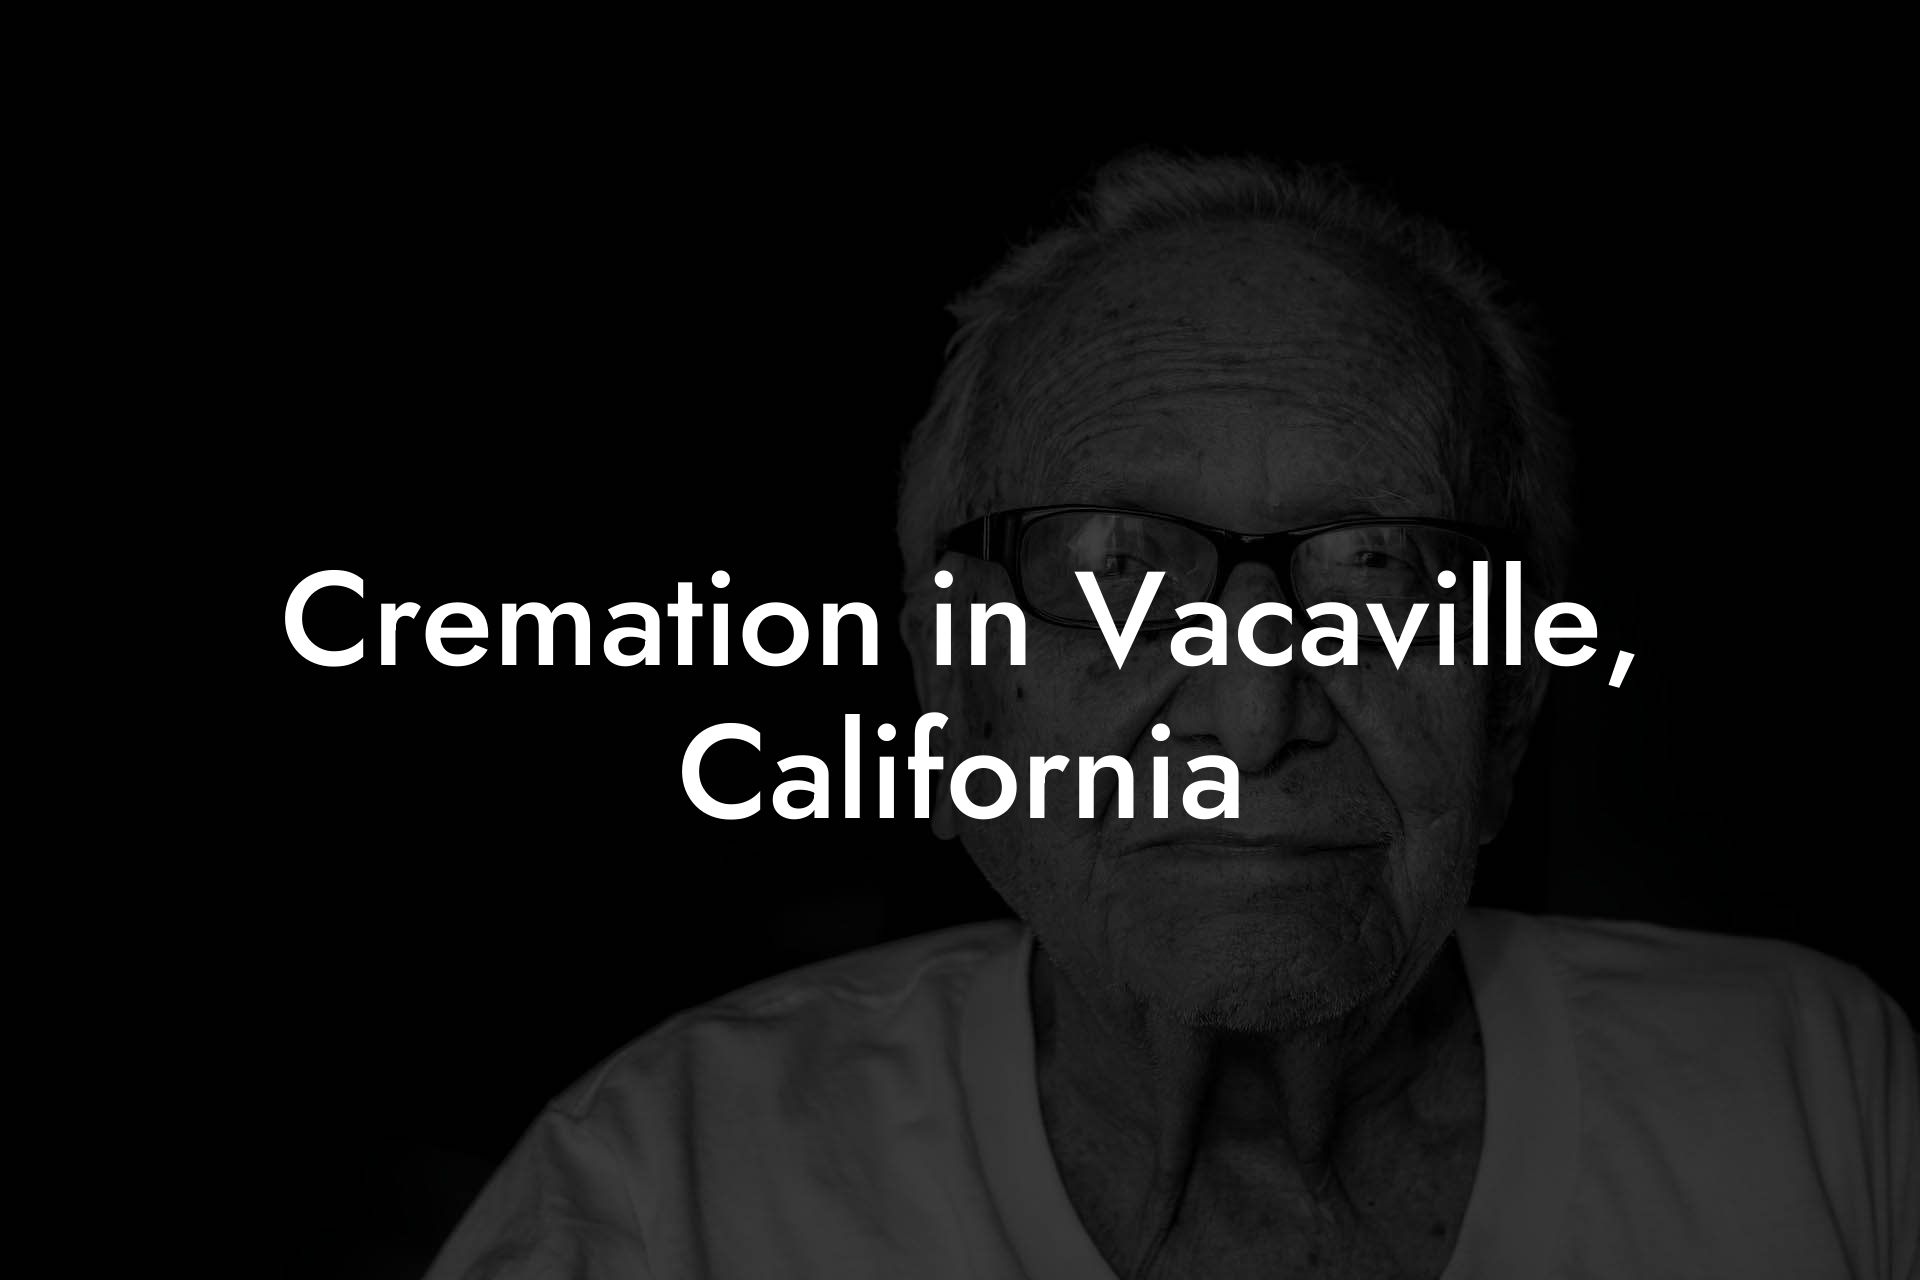 Cremation in Vacaville, California